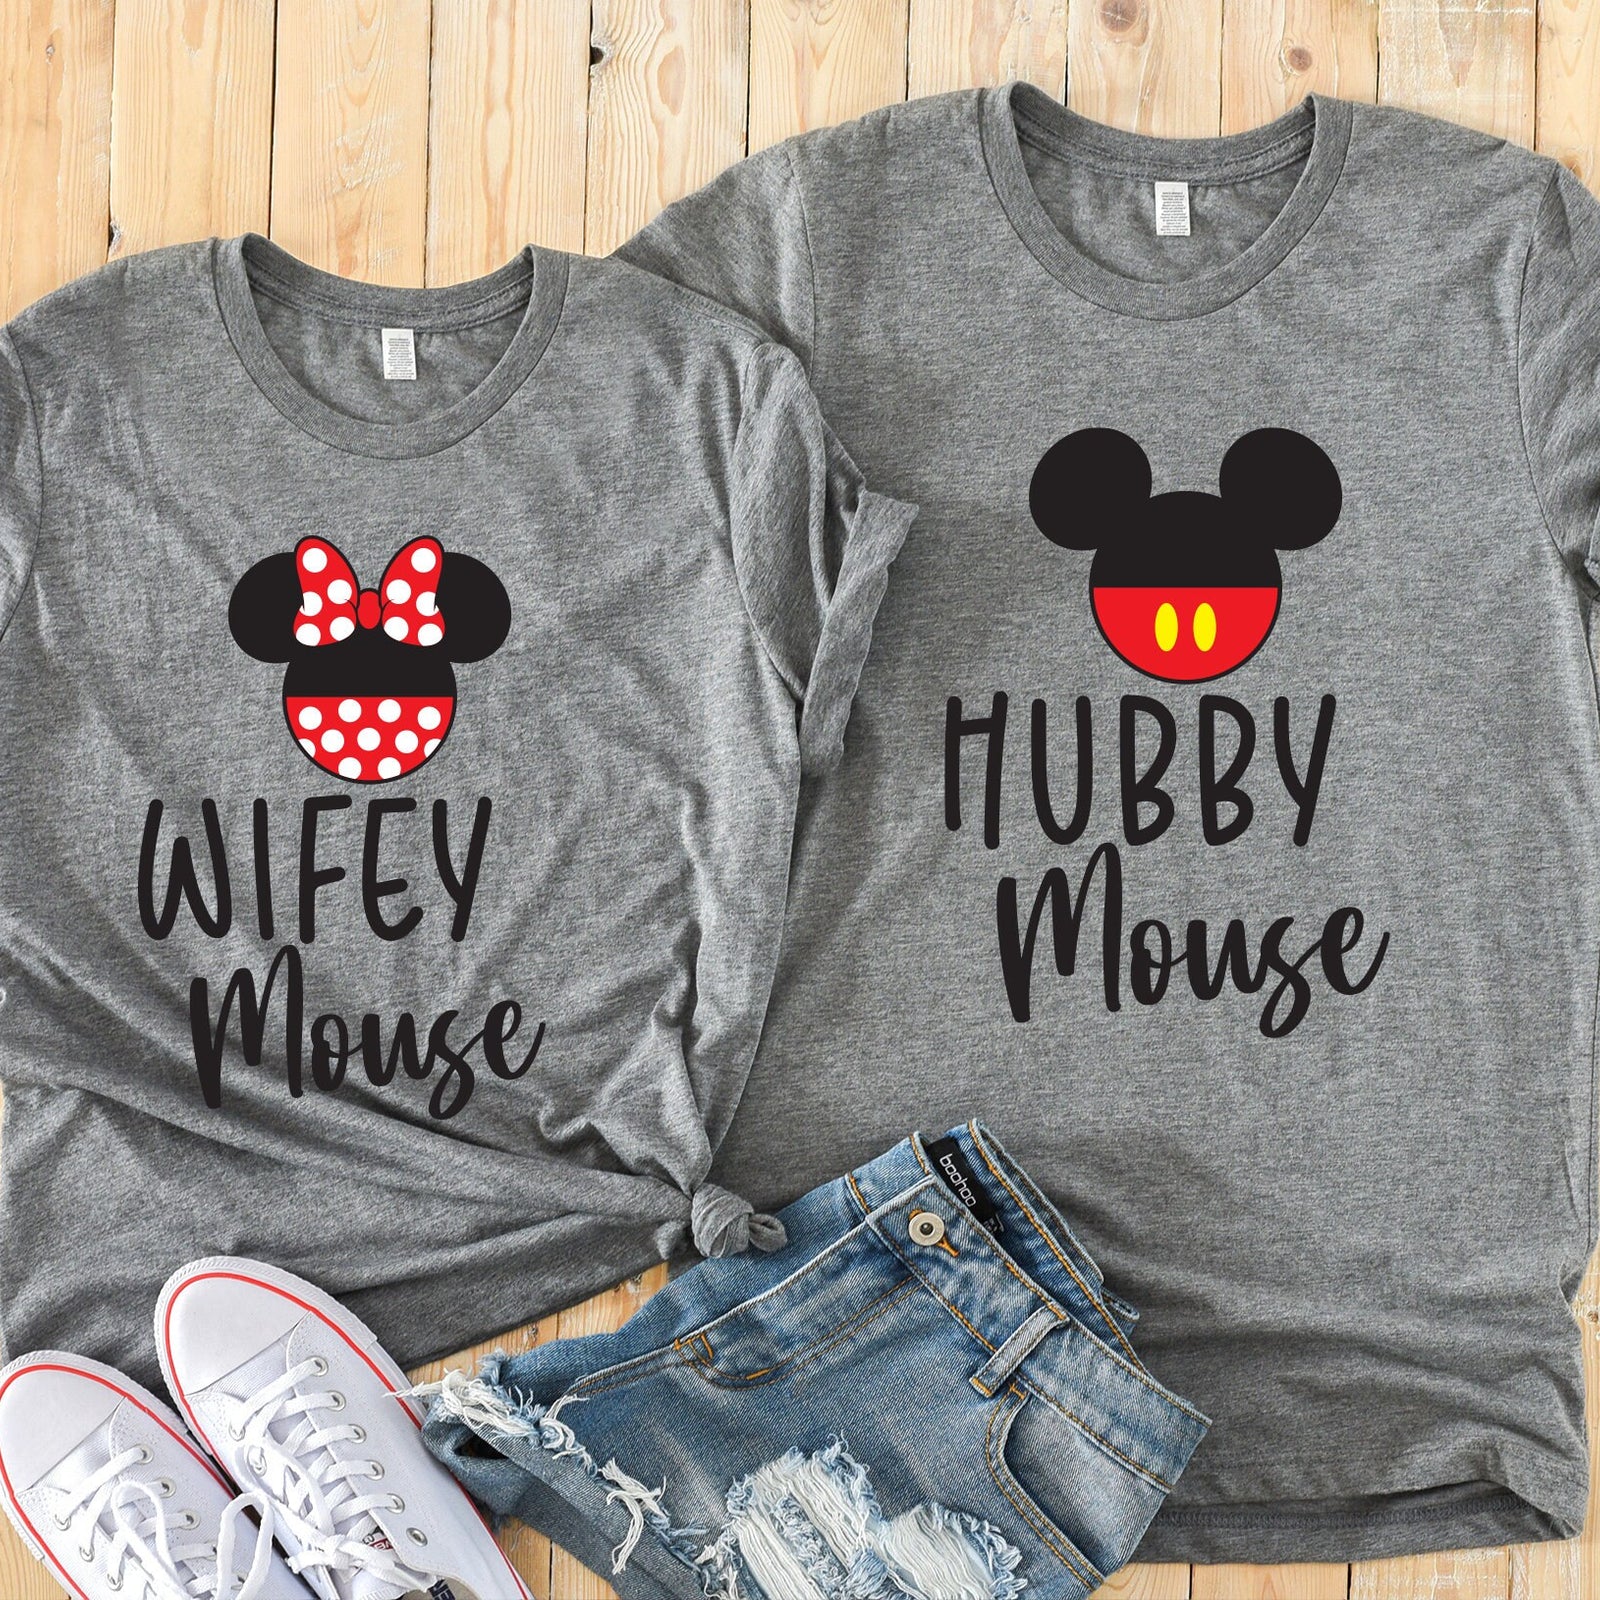 Hubby Mouse and Wifey Mouse Custom Matching Disney Shirts - Disney Couples - Mickey and Minnie